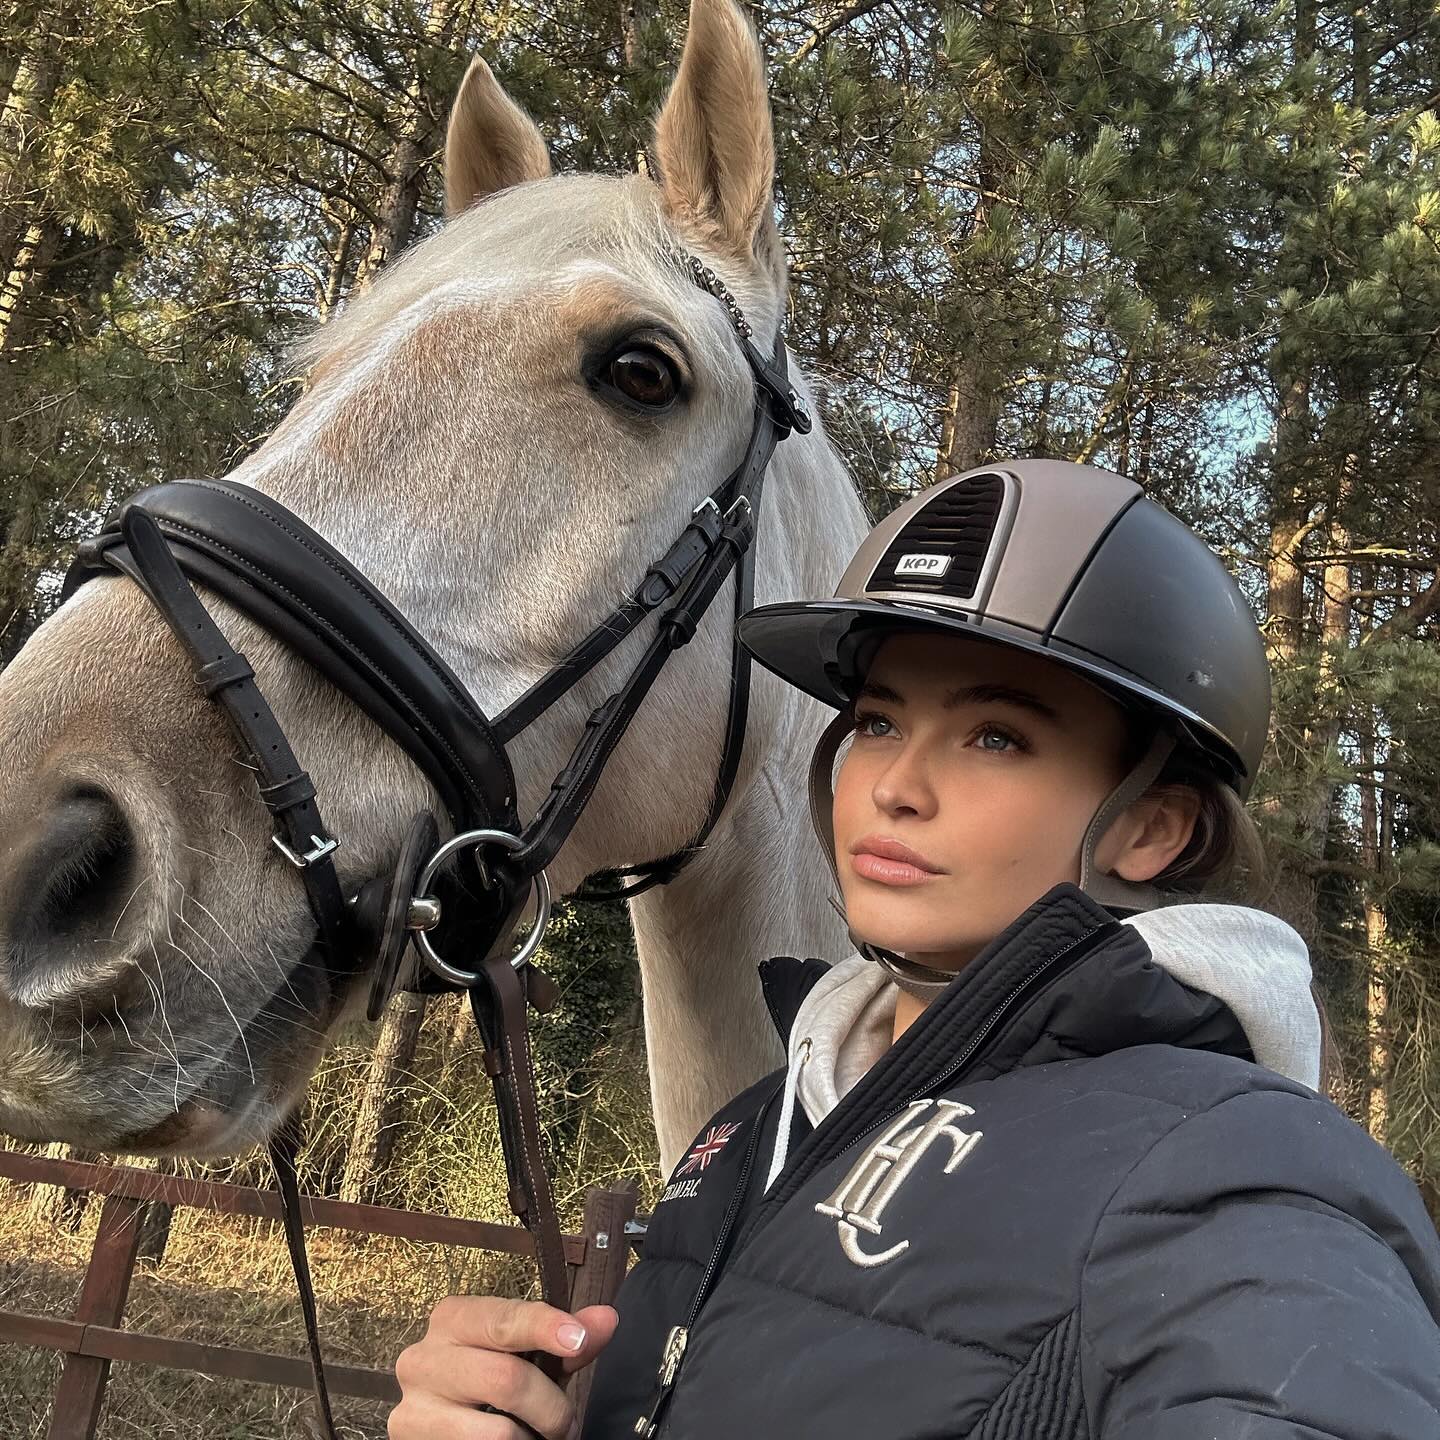 Her first-class horse-riding hobby will set her back thousands of pounds a year